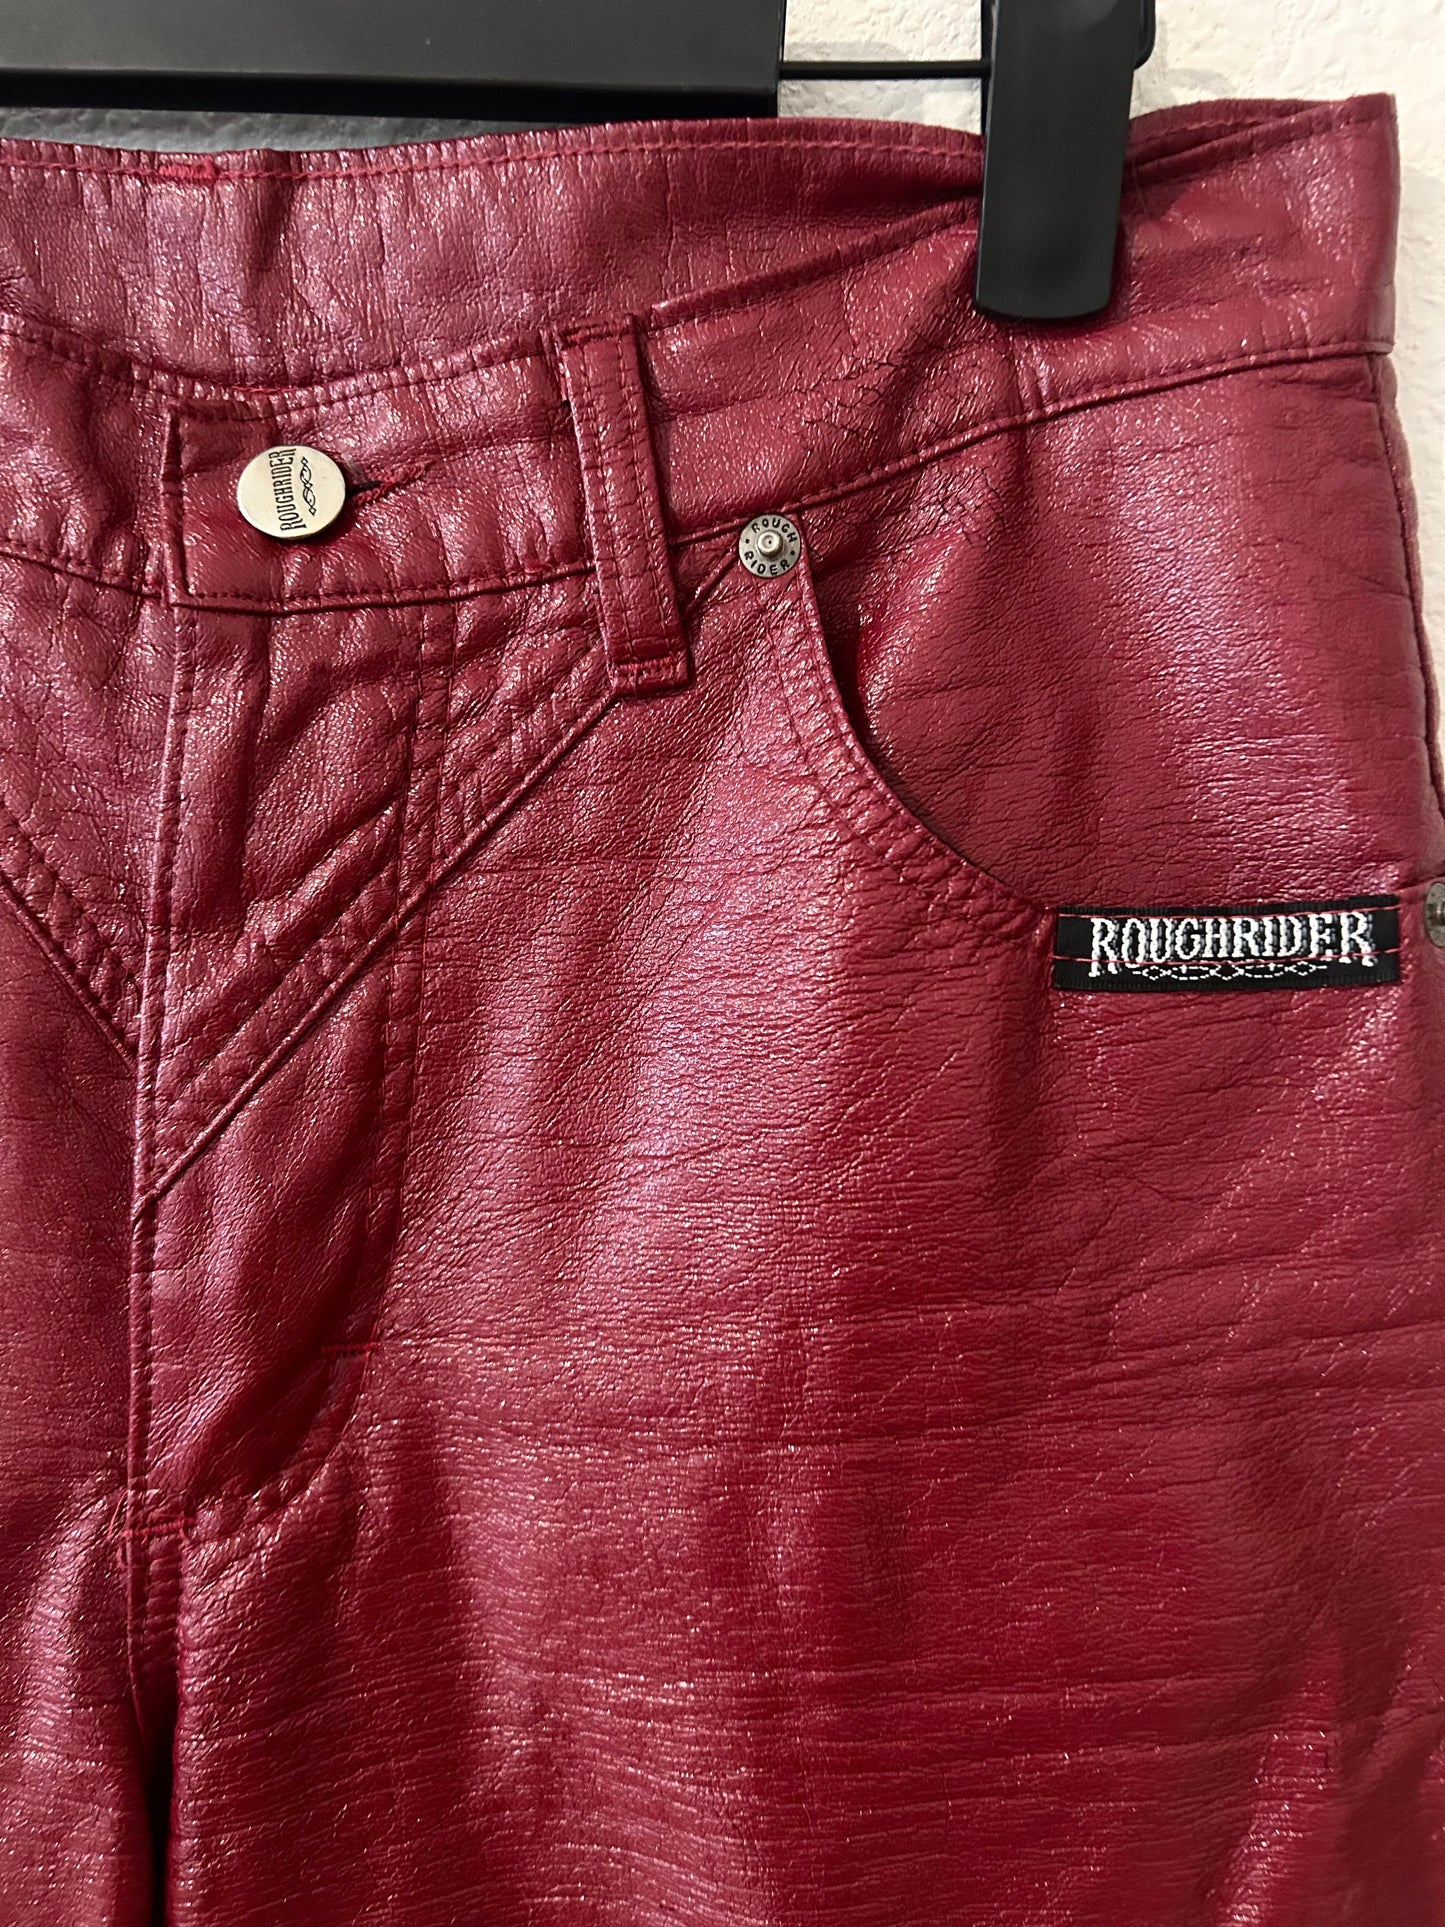 Roughriders Vintage Red Faux Leather Pants (6)